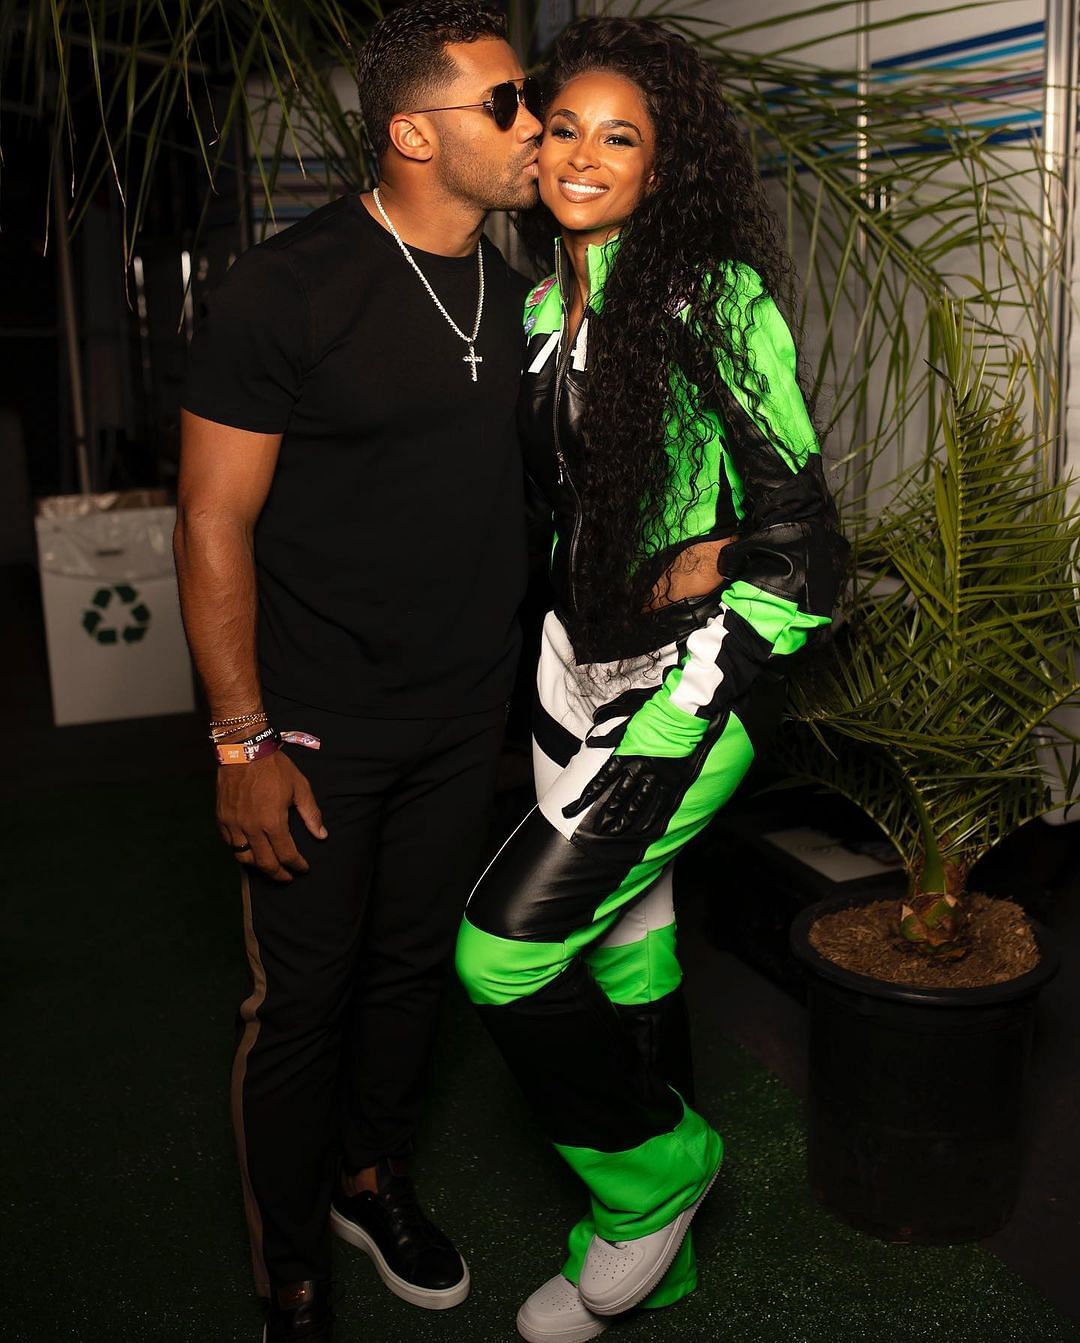 5 Finds from Ciara & Russell Wilson's Kohl's Line We're Obsessed With